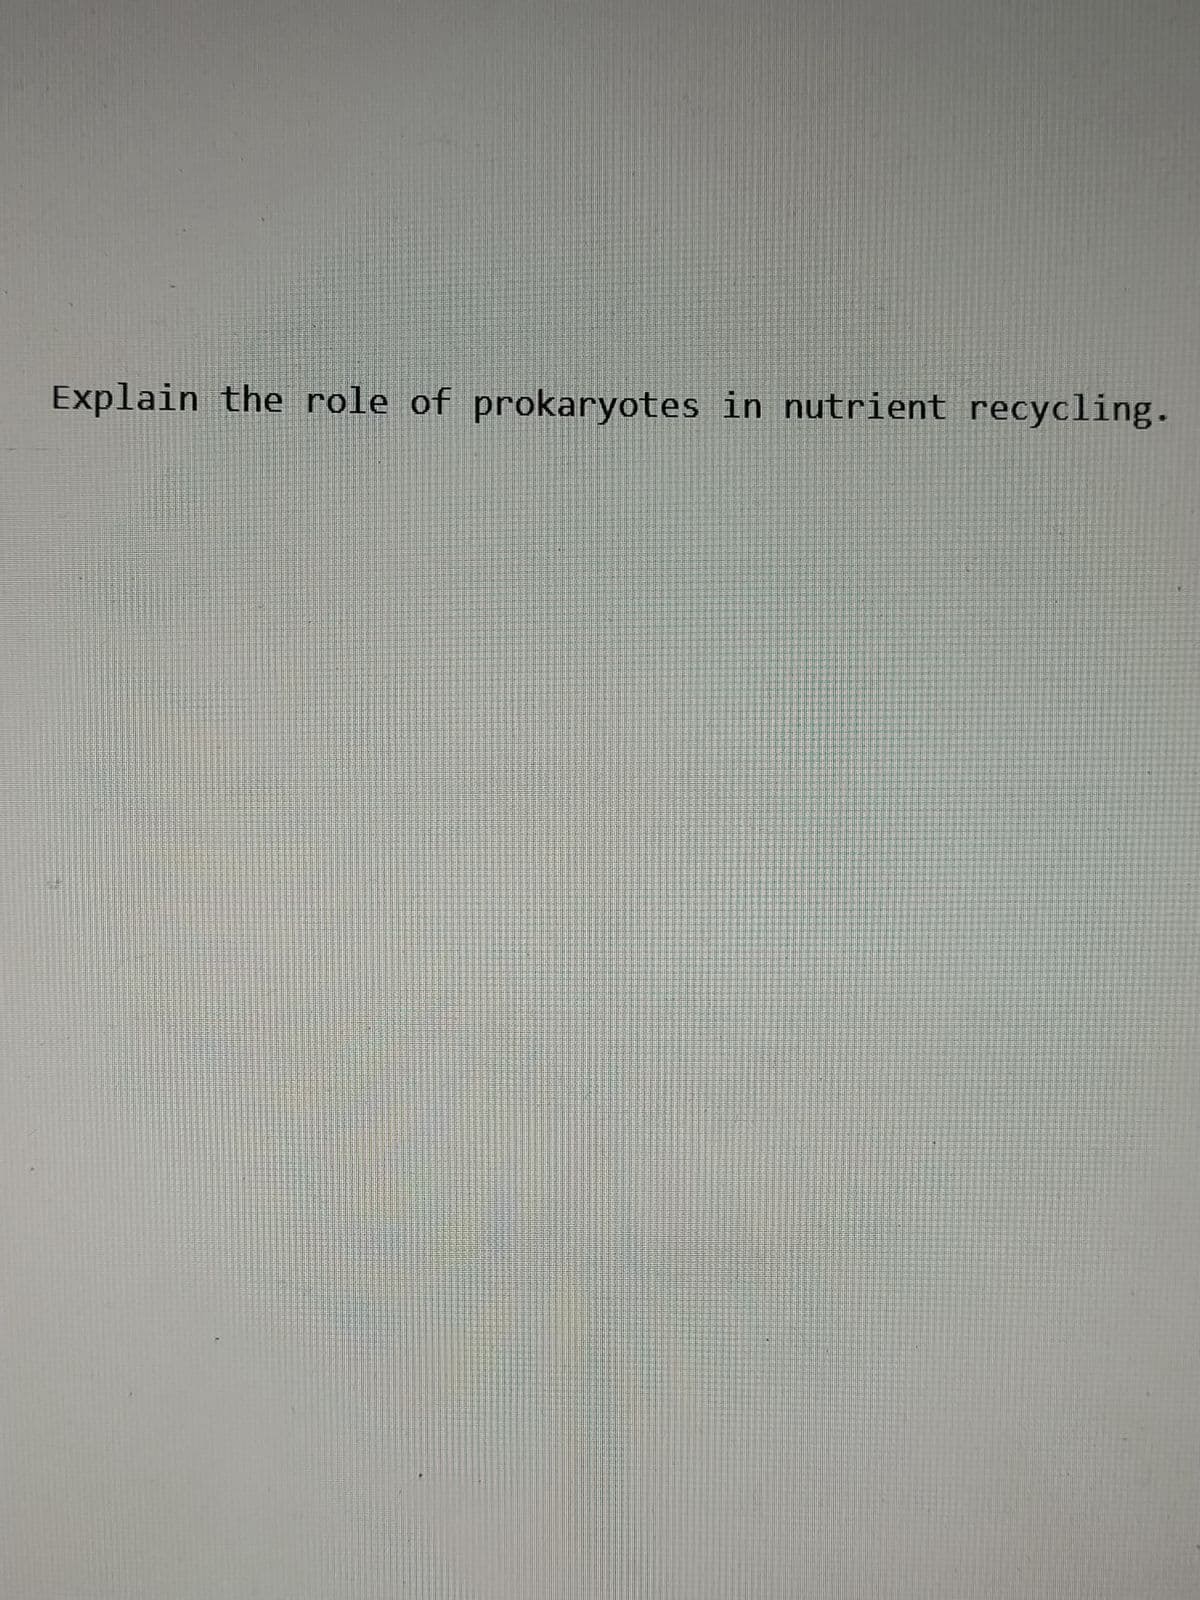 Explain the role of prokaryotes in nutrient recycling.